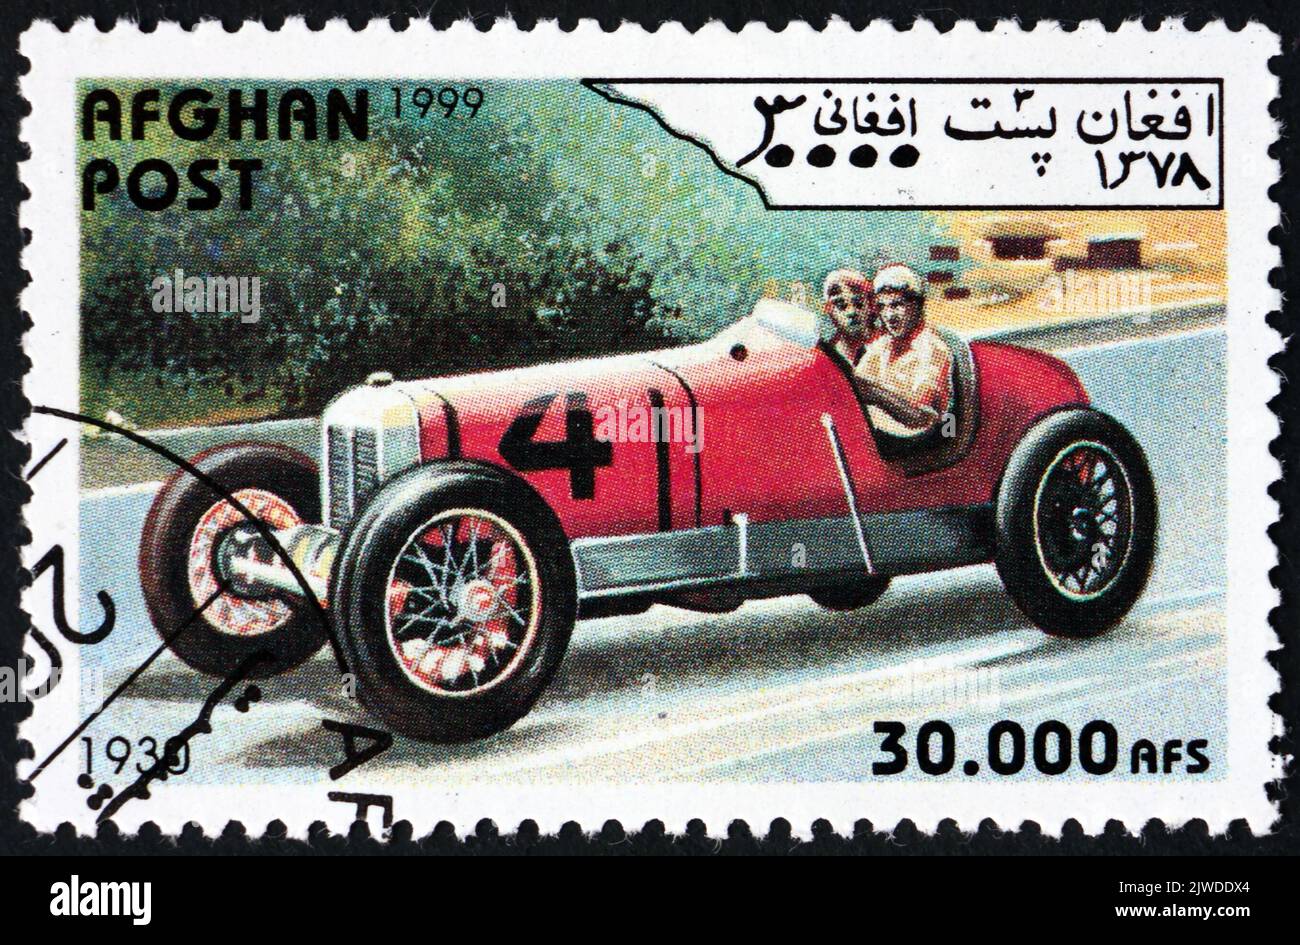 AFGHANISTAN - CIRCA 1999: a stamp printed in Afghanistan shows vintage racing car from 1930, circa 1999 Stock Photo